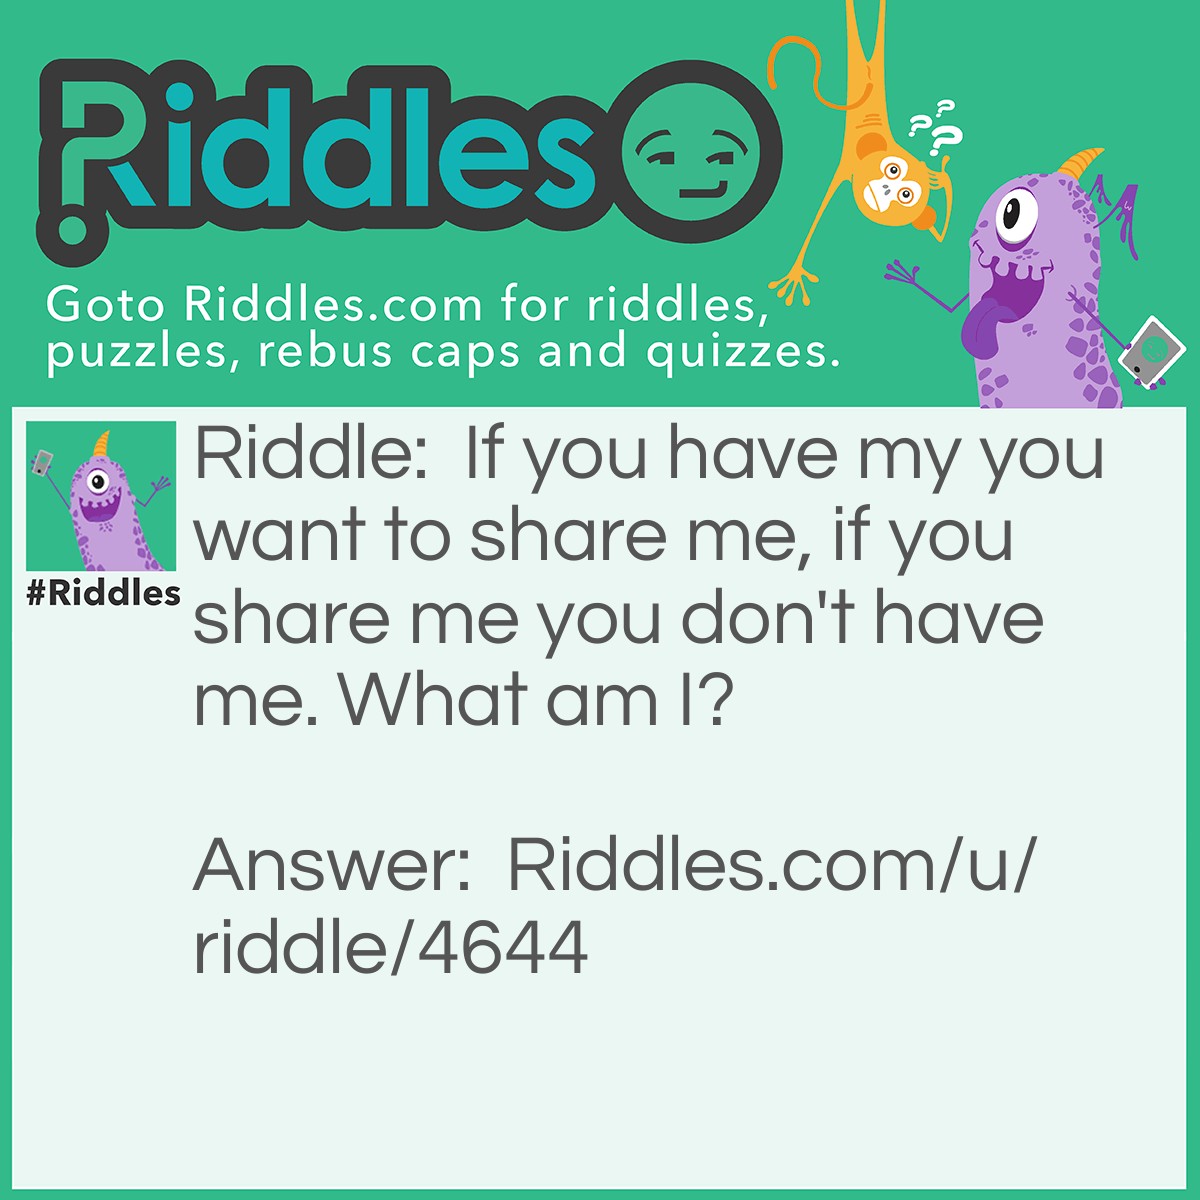 Riddle: If you have my you want to share me, if you share me you don't have me. What am I? Answer: Secret.